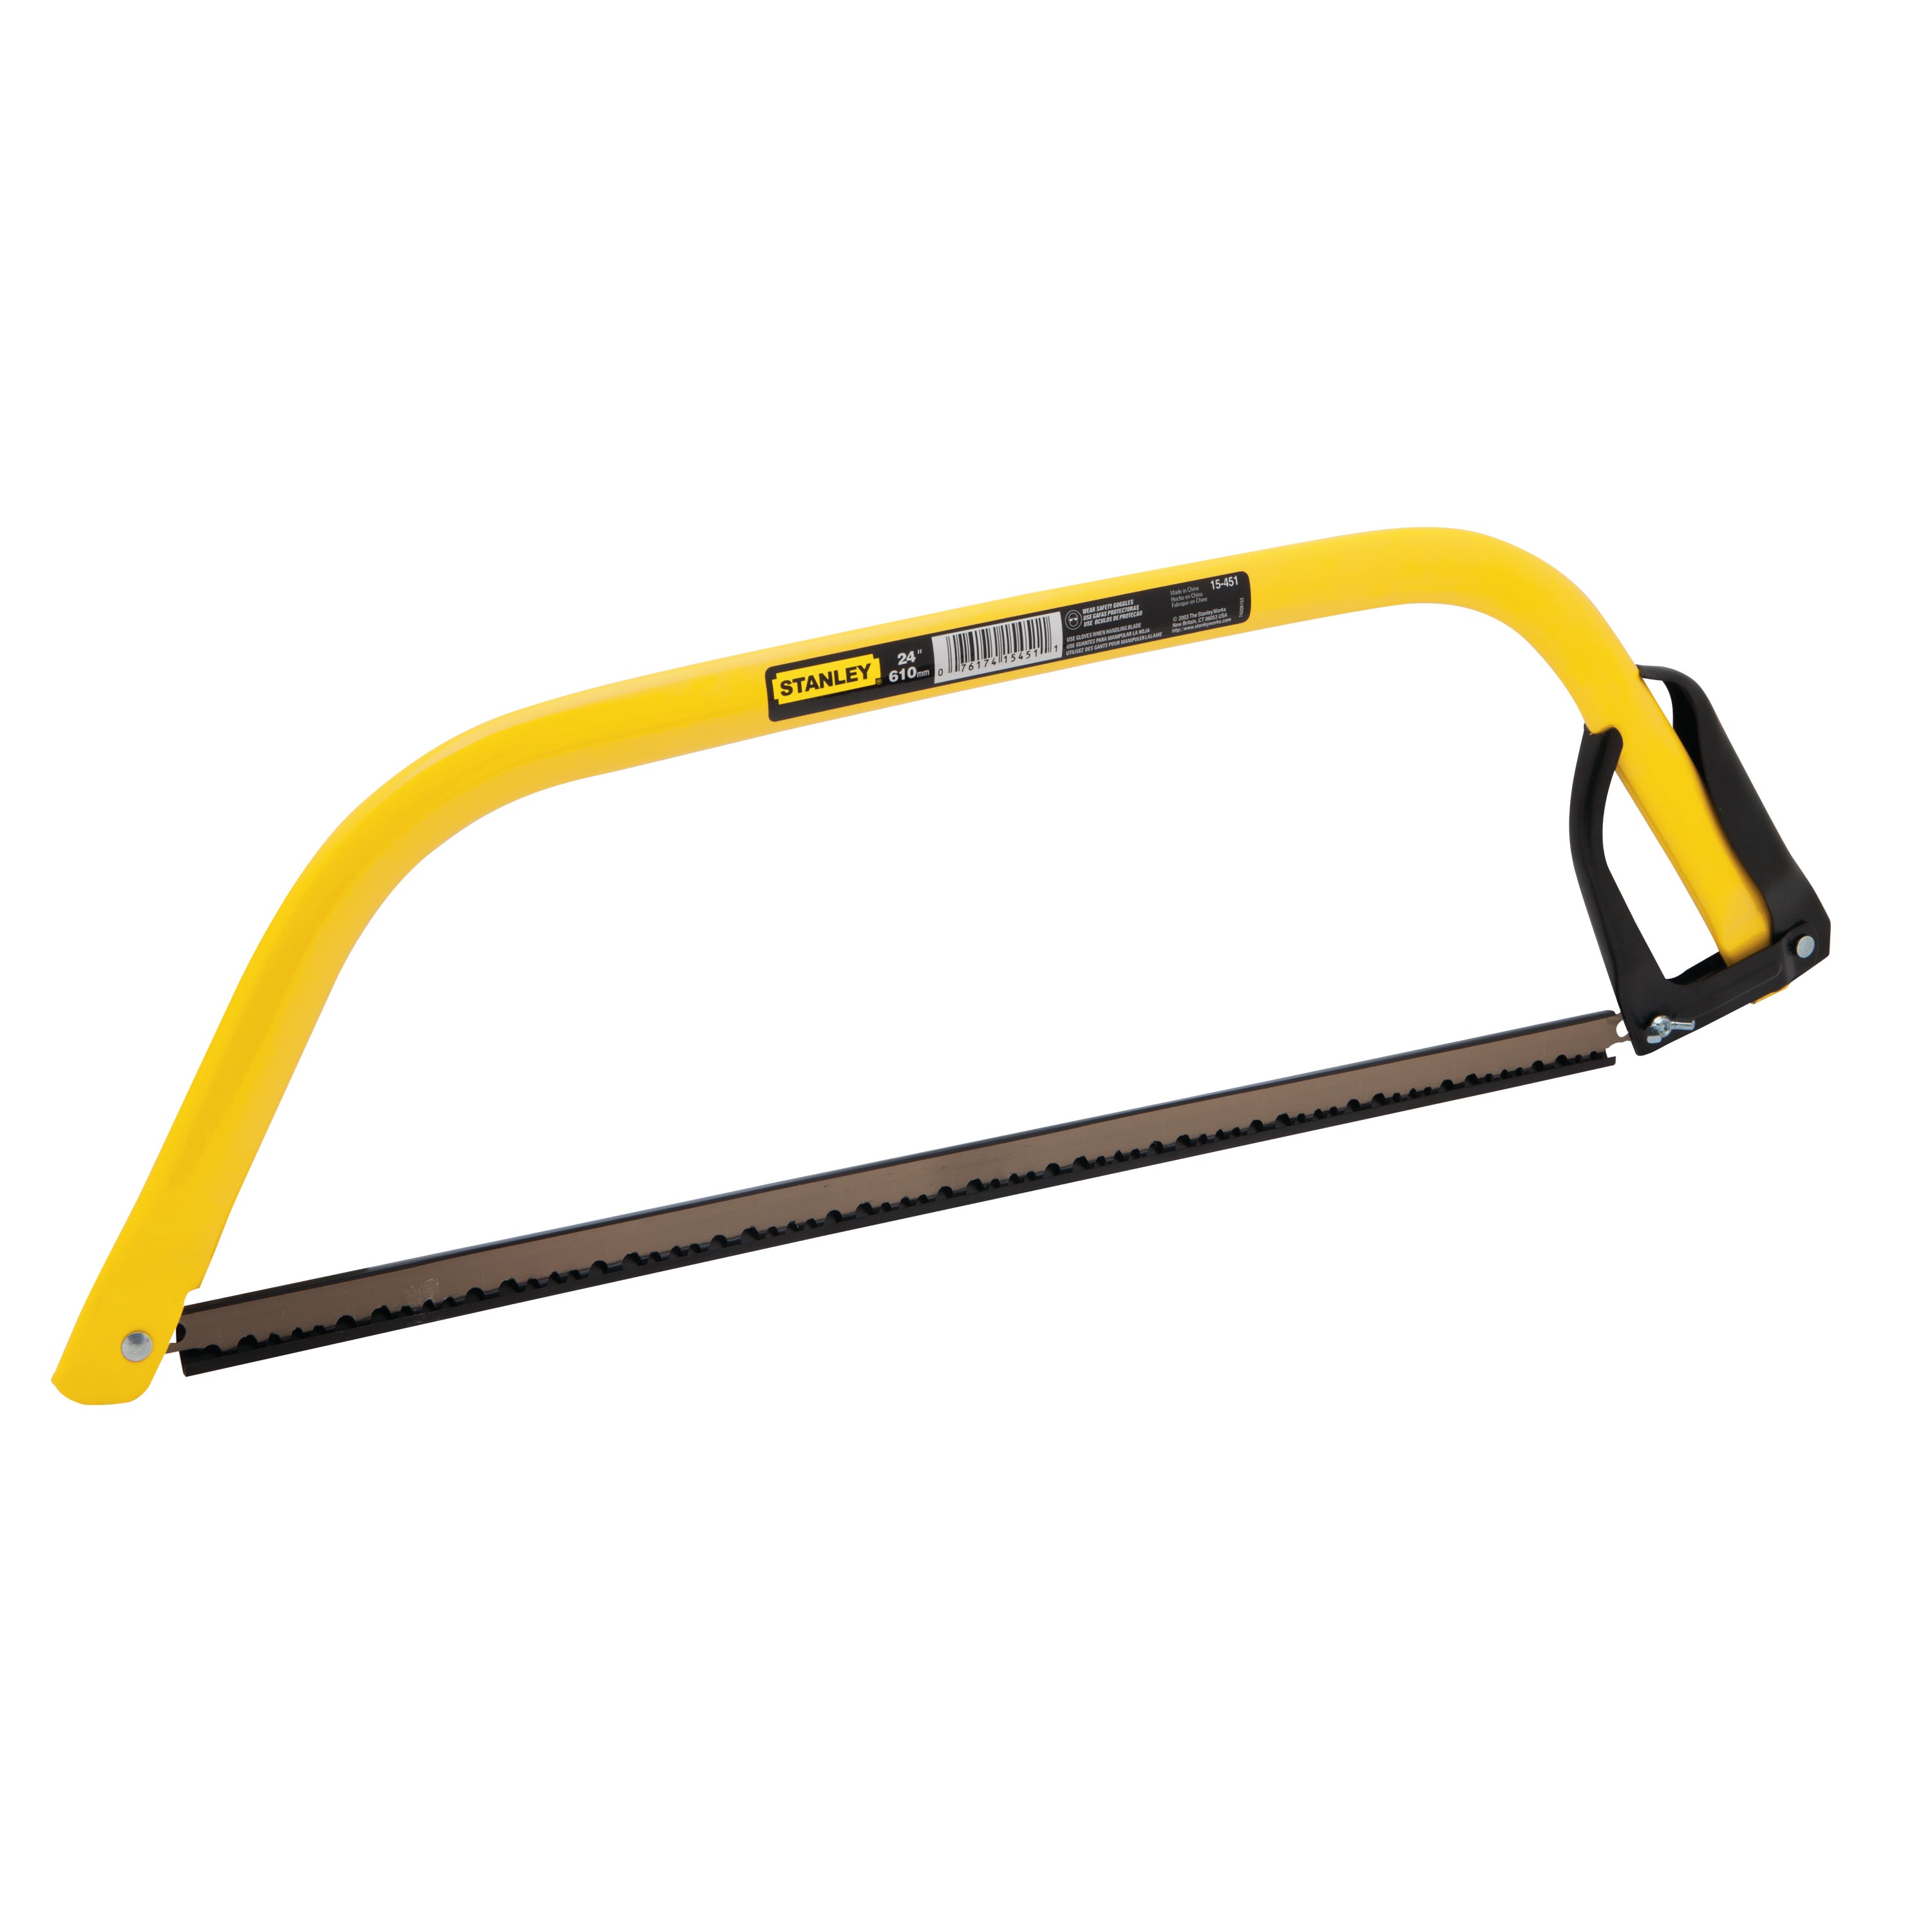 24 in Bow Saw - 15-451 | STANLEY Tools